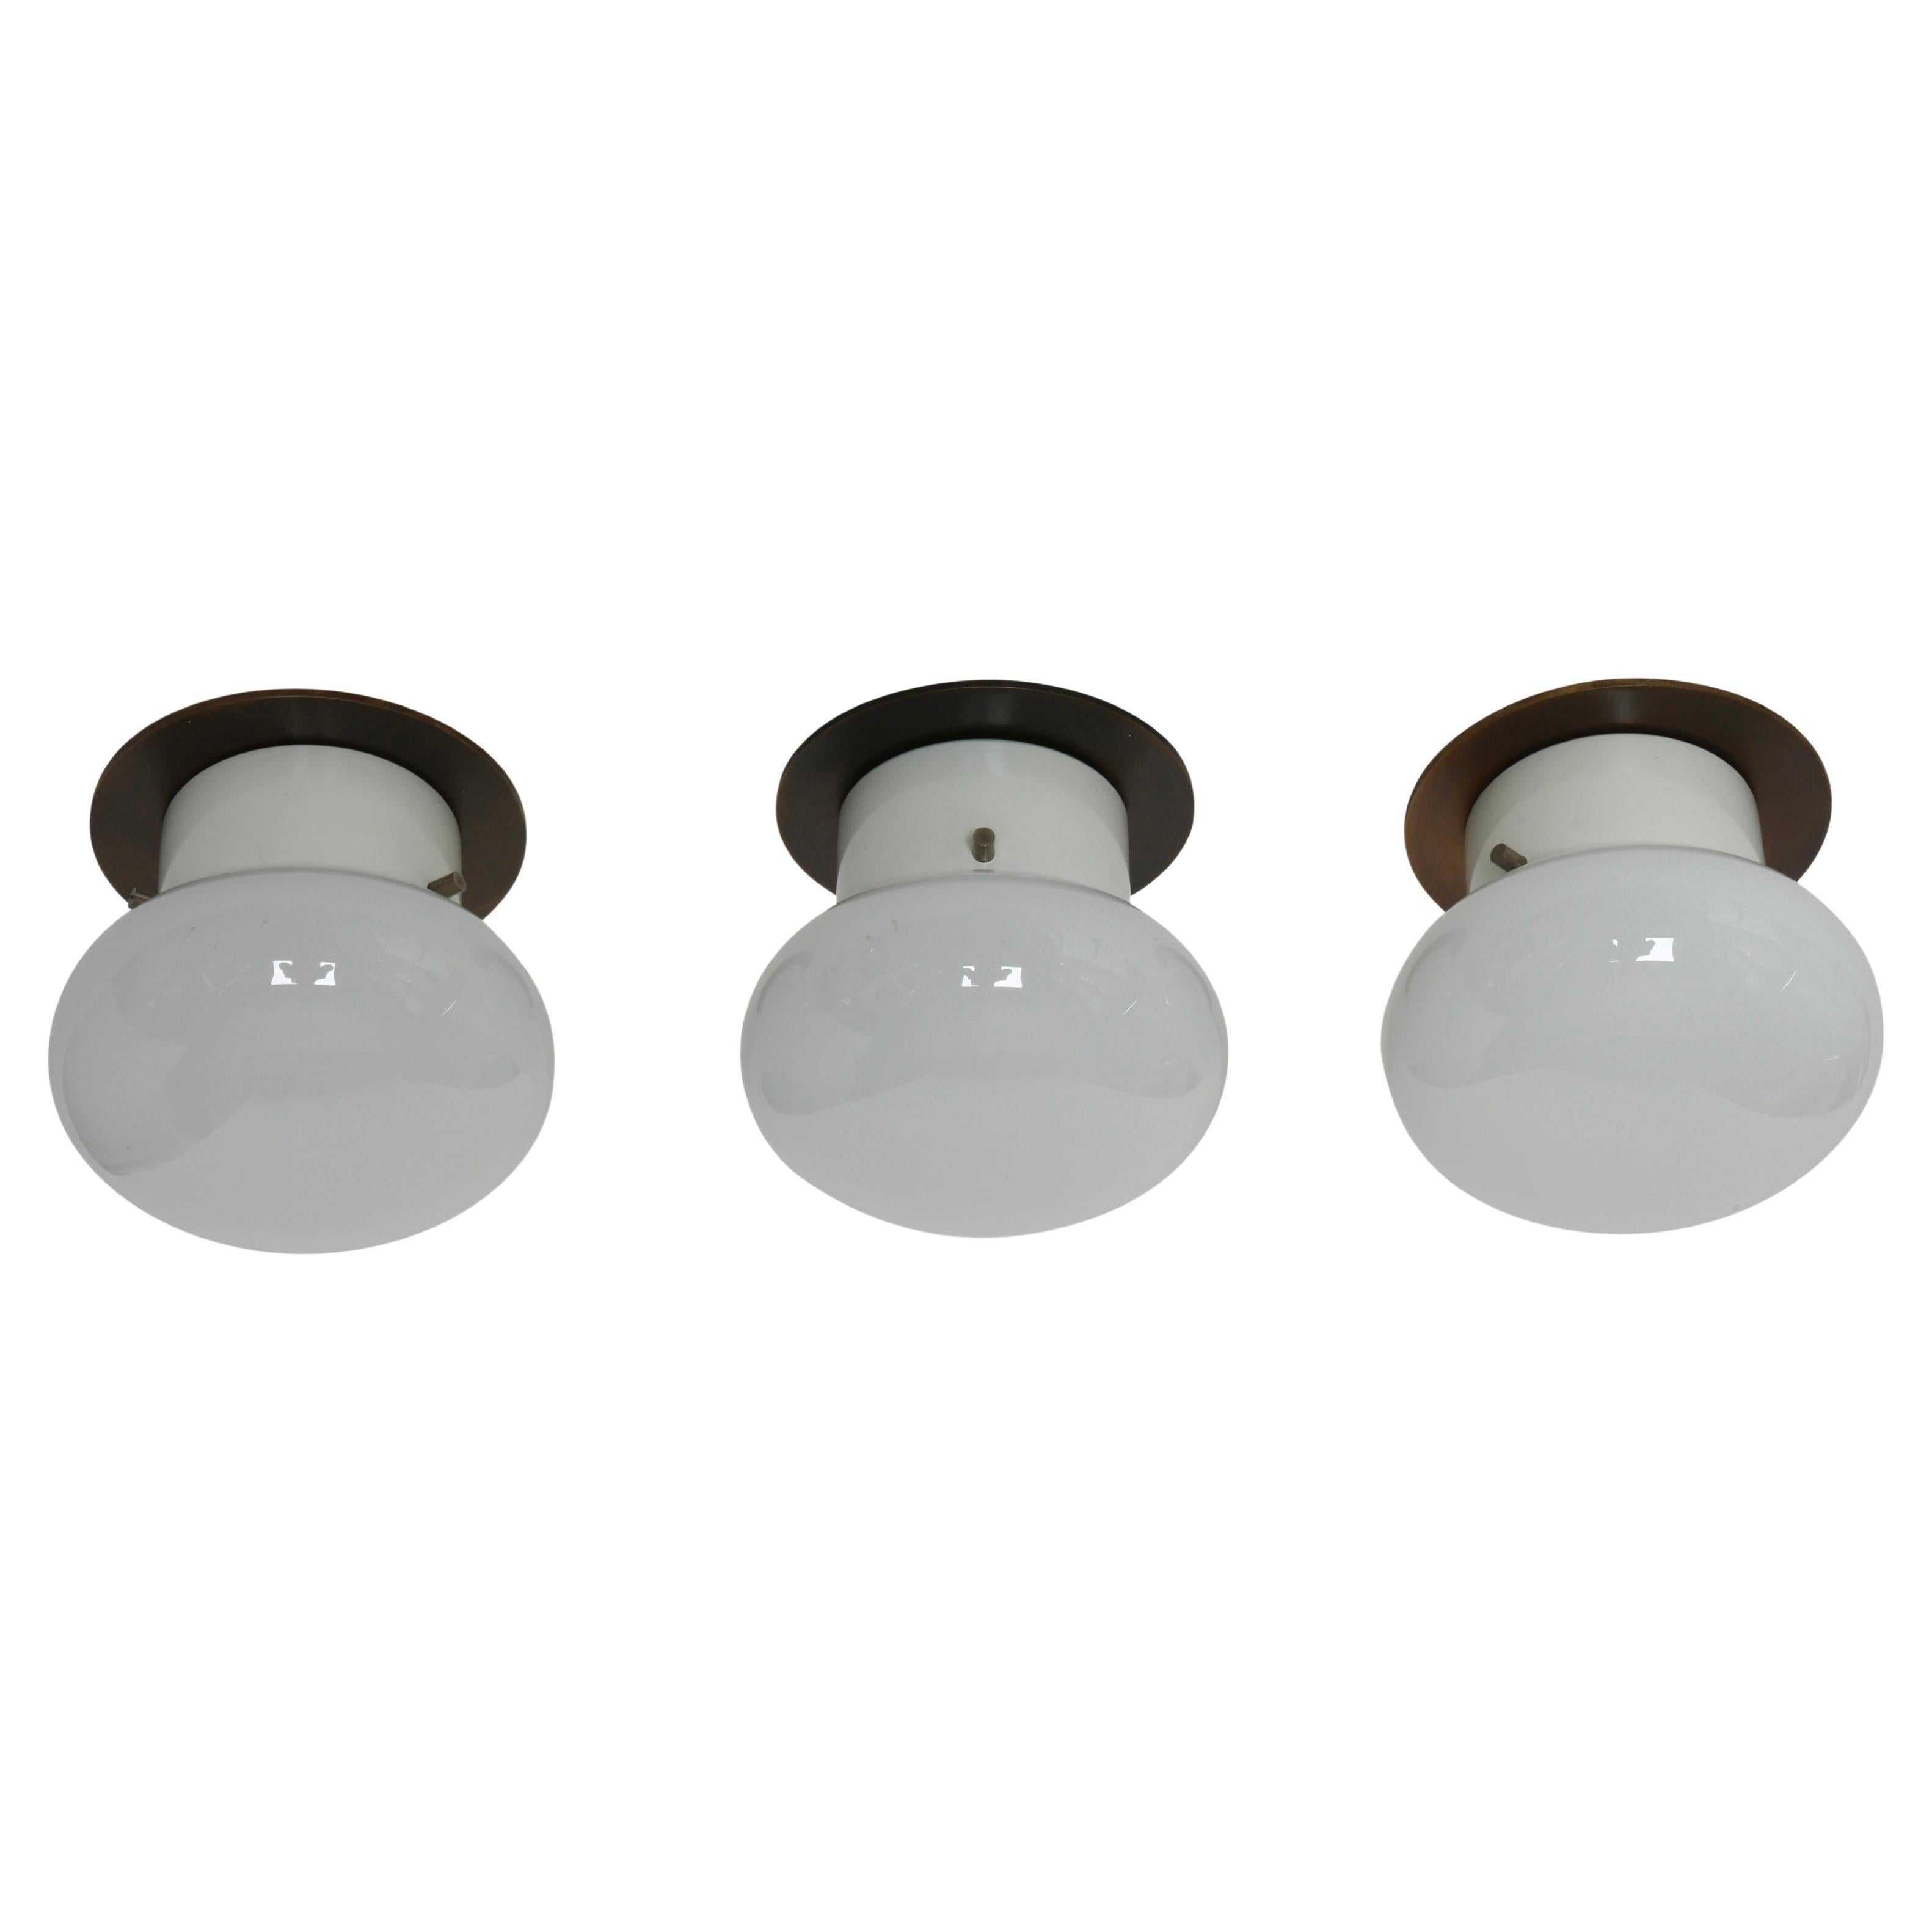 Italian sconces by Valenti, set of 3
Opaline glass, enameled metal in ivory color.
Complimentary US rewiring with custom patinated brass backplates.
